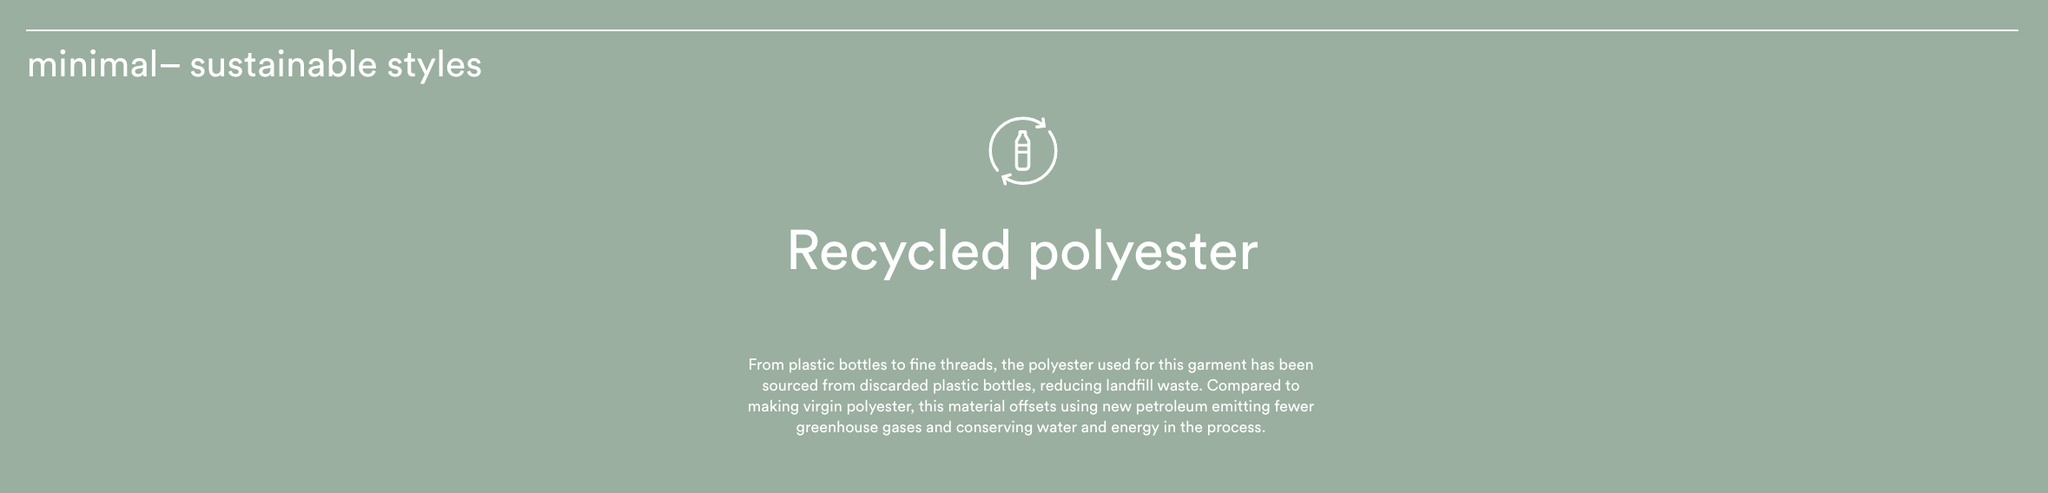 recylcled polyester